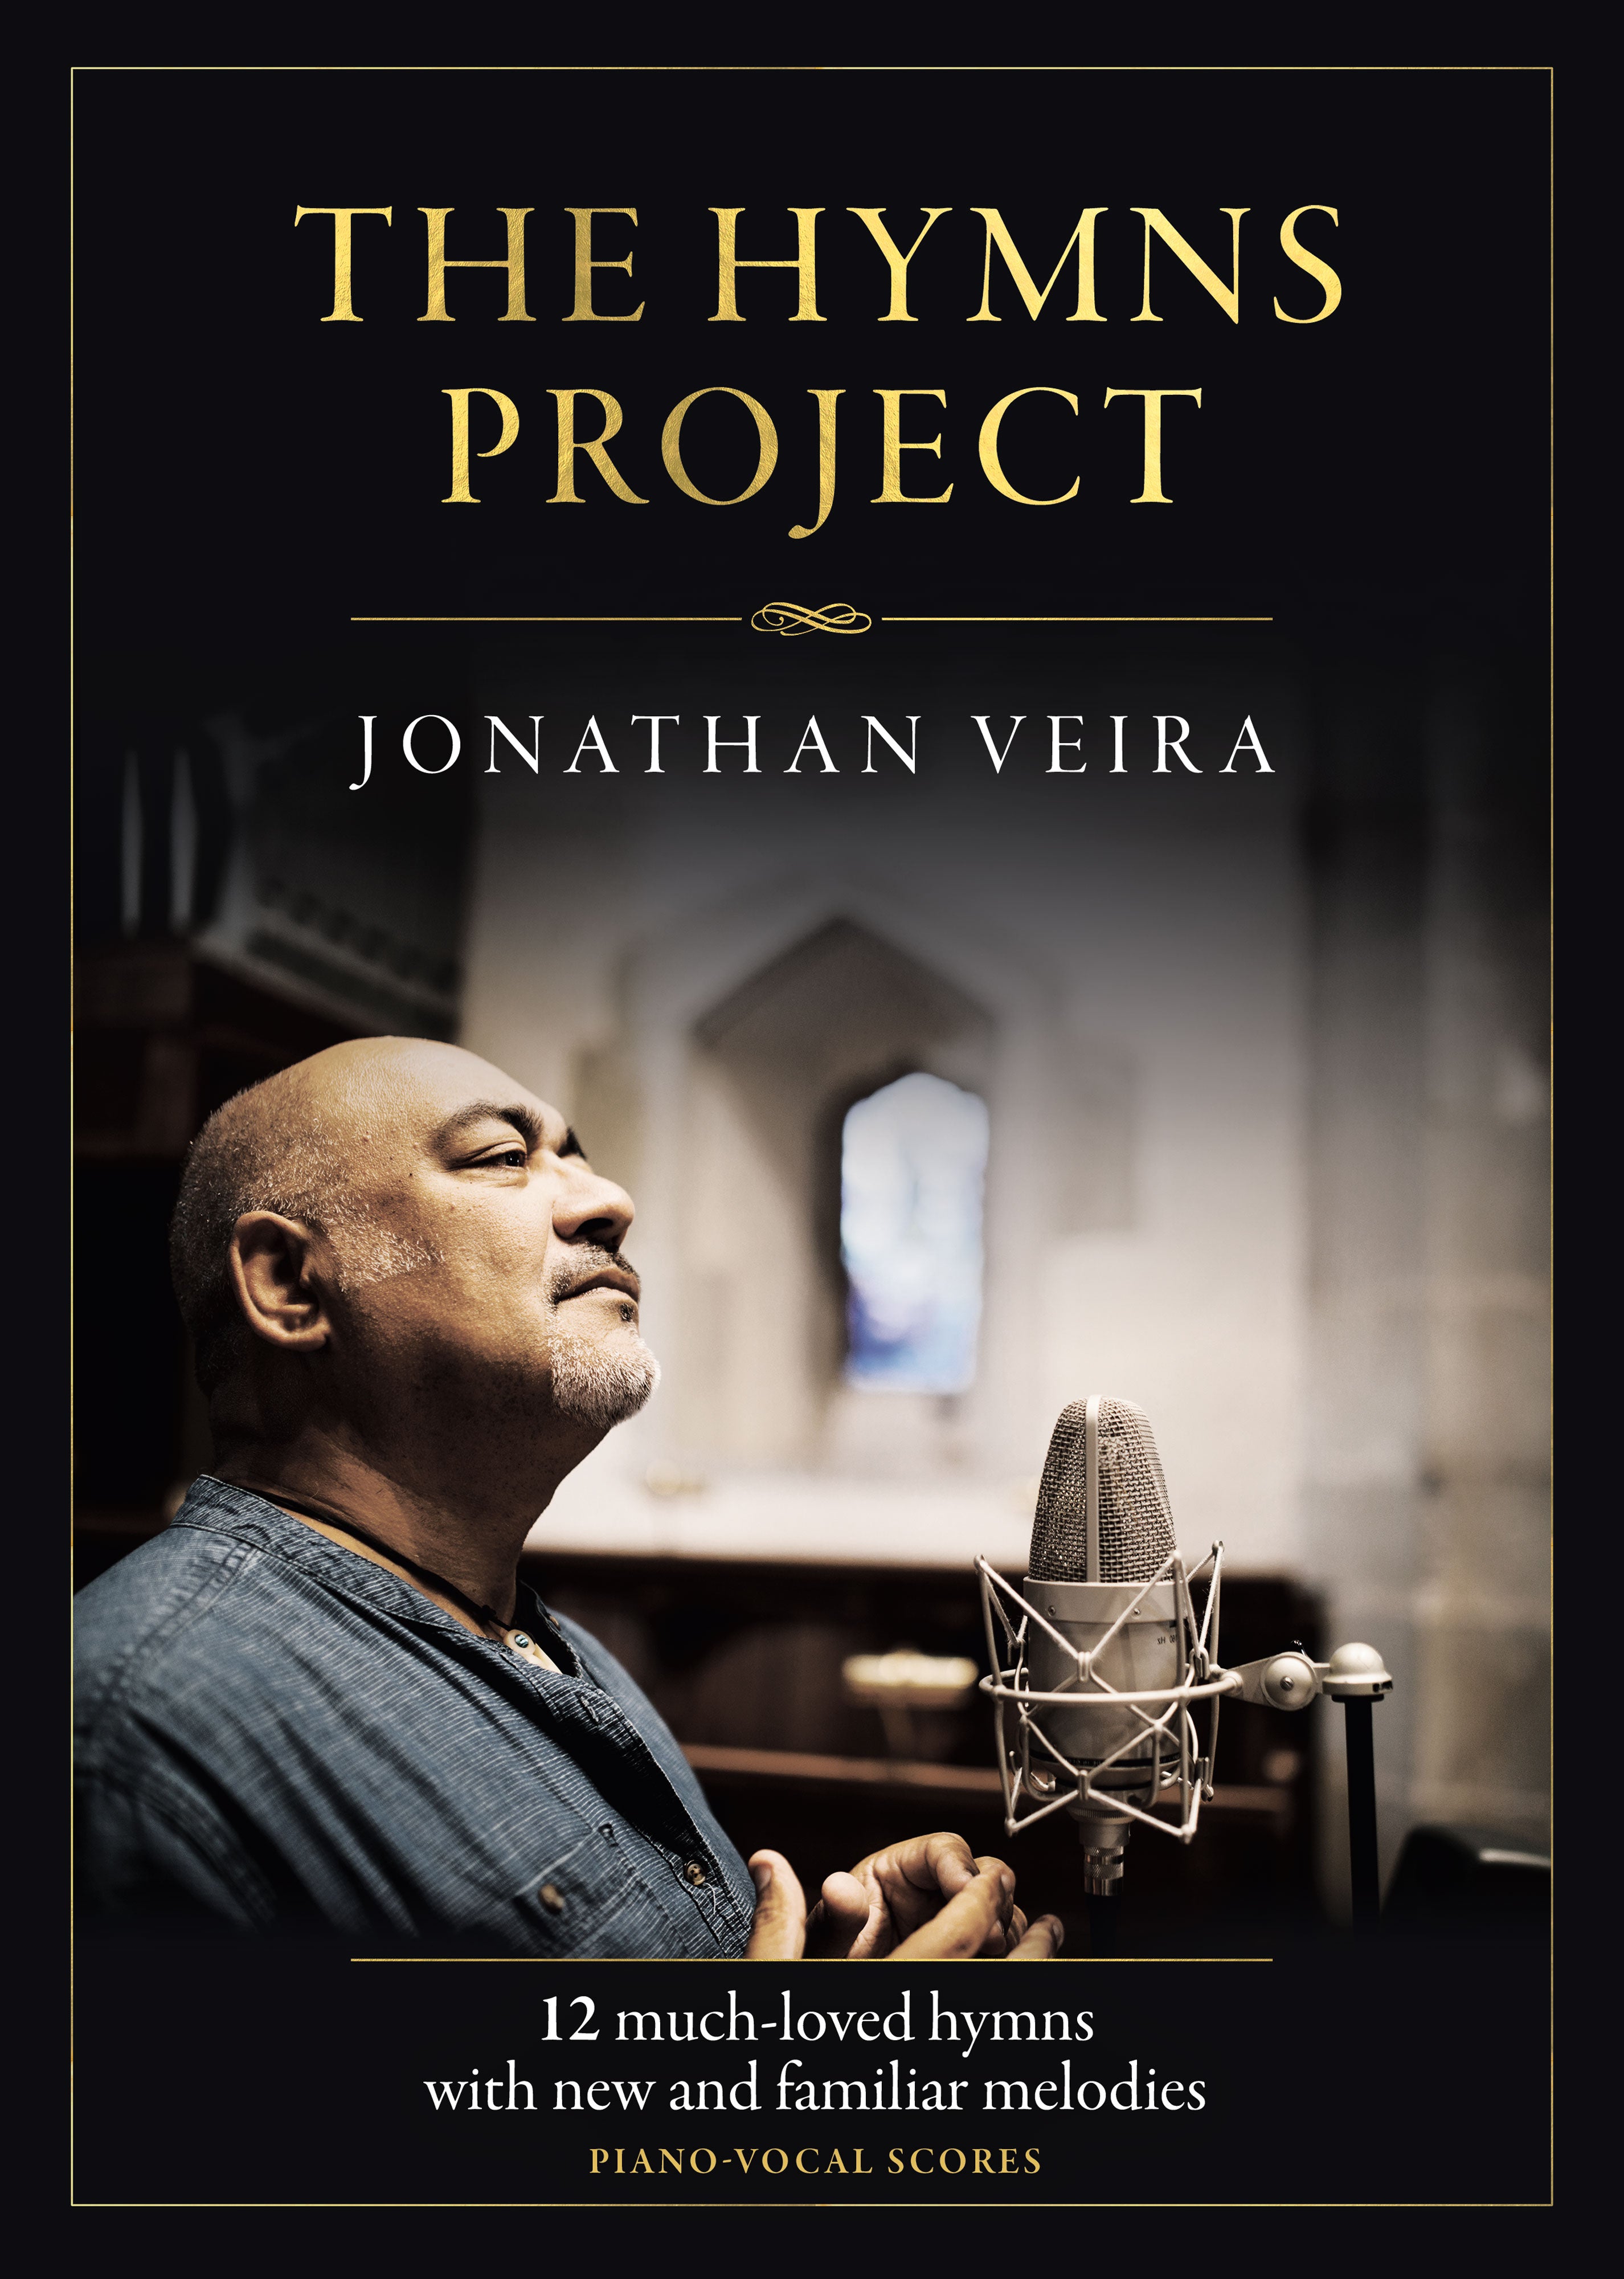 Image of The Hymns Project Songbook (Jonathan Veira) other